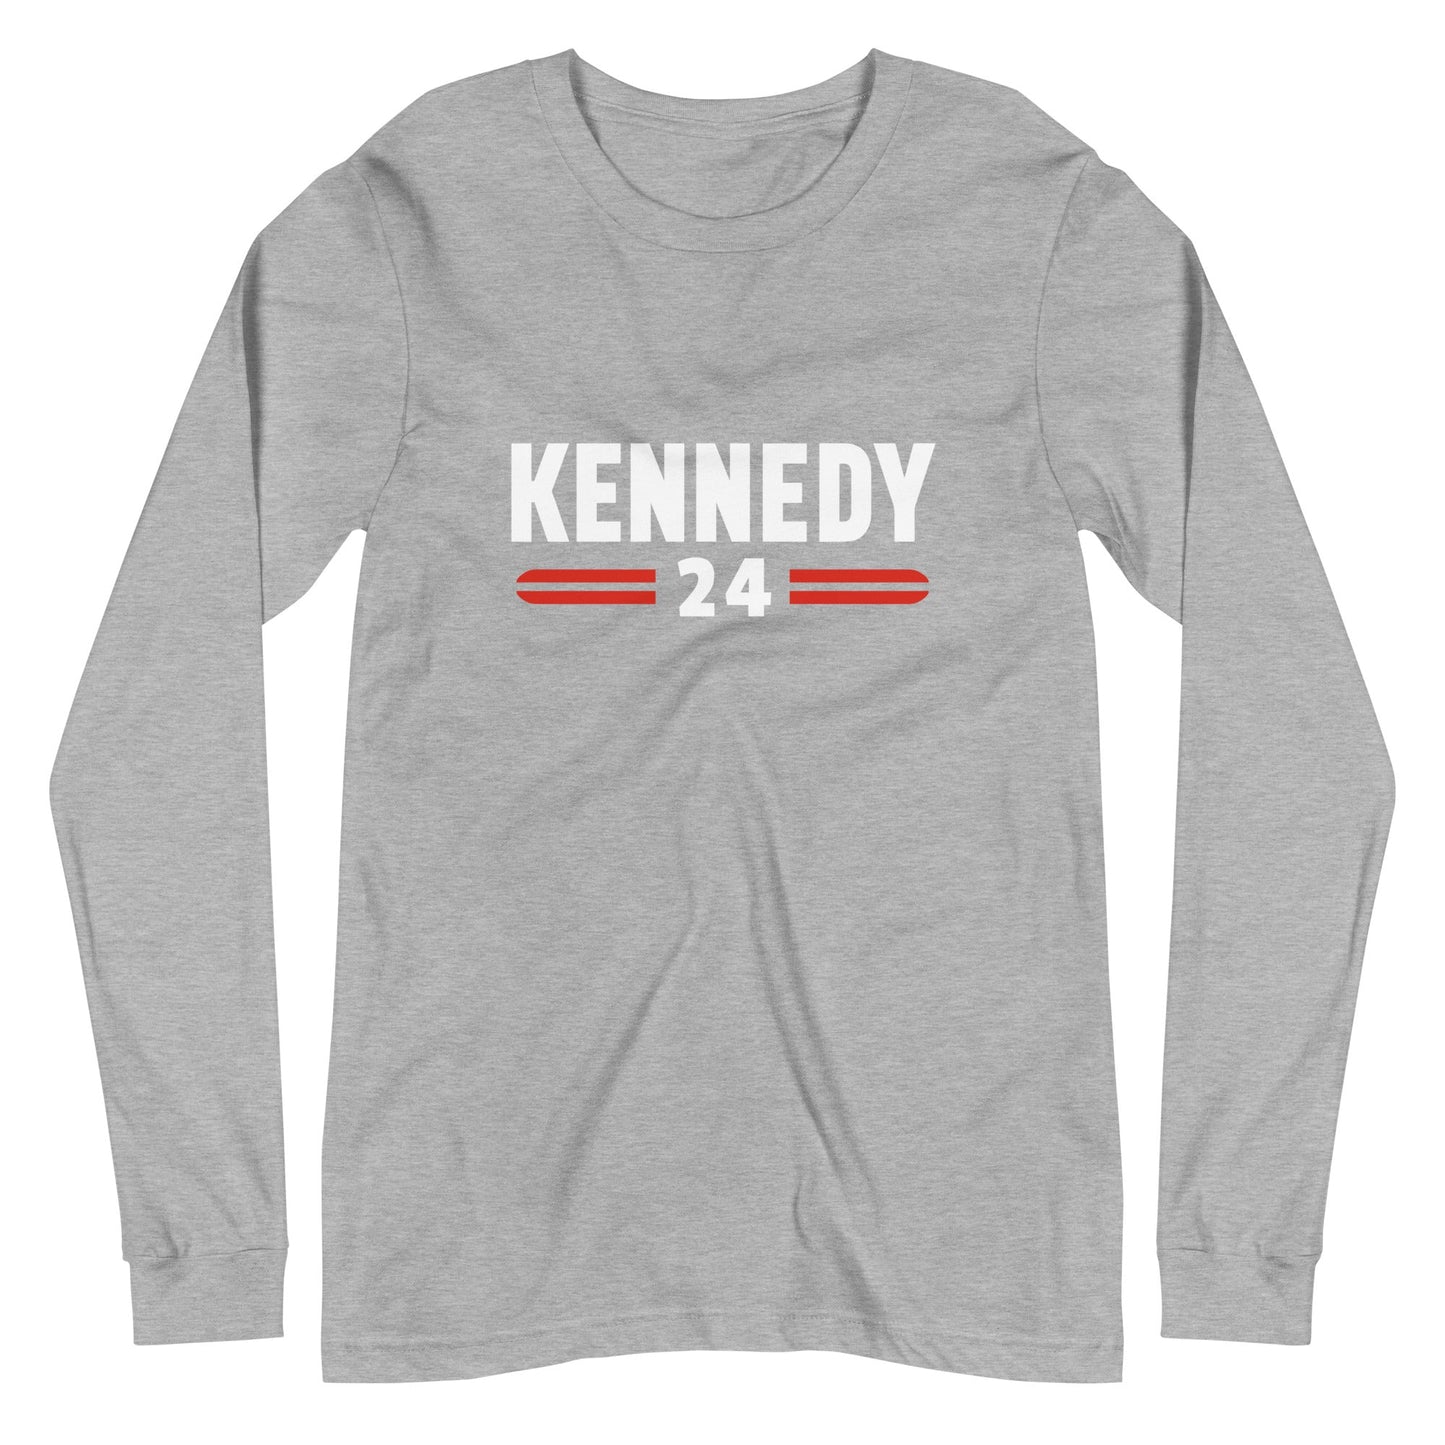 Kennedy Classic Unisex Long Sleeve Tee - TEAM KENNEDY. All rights reserved